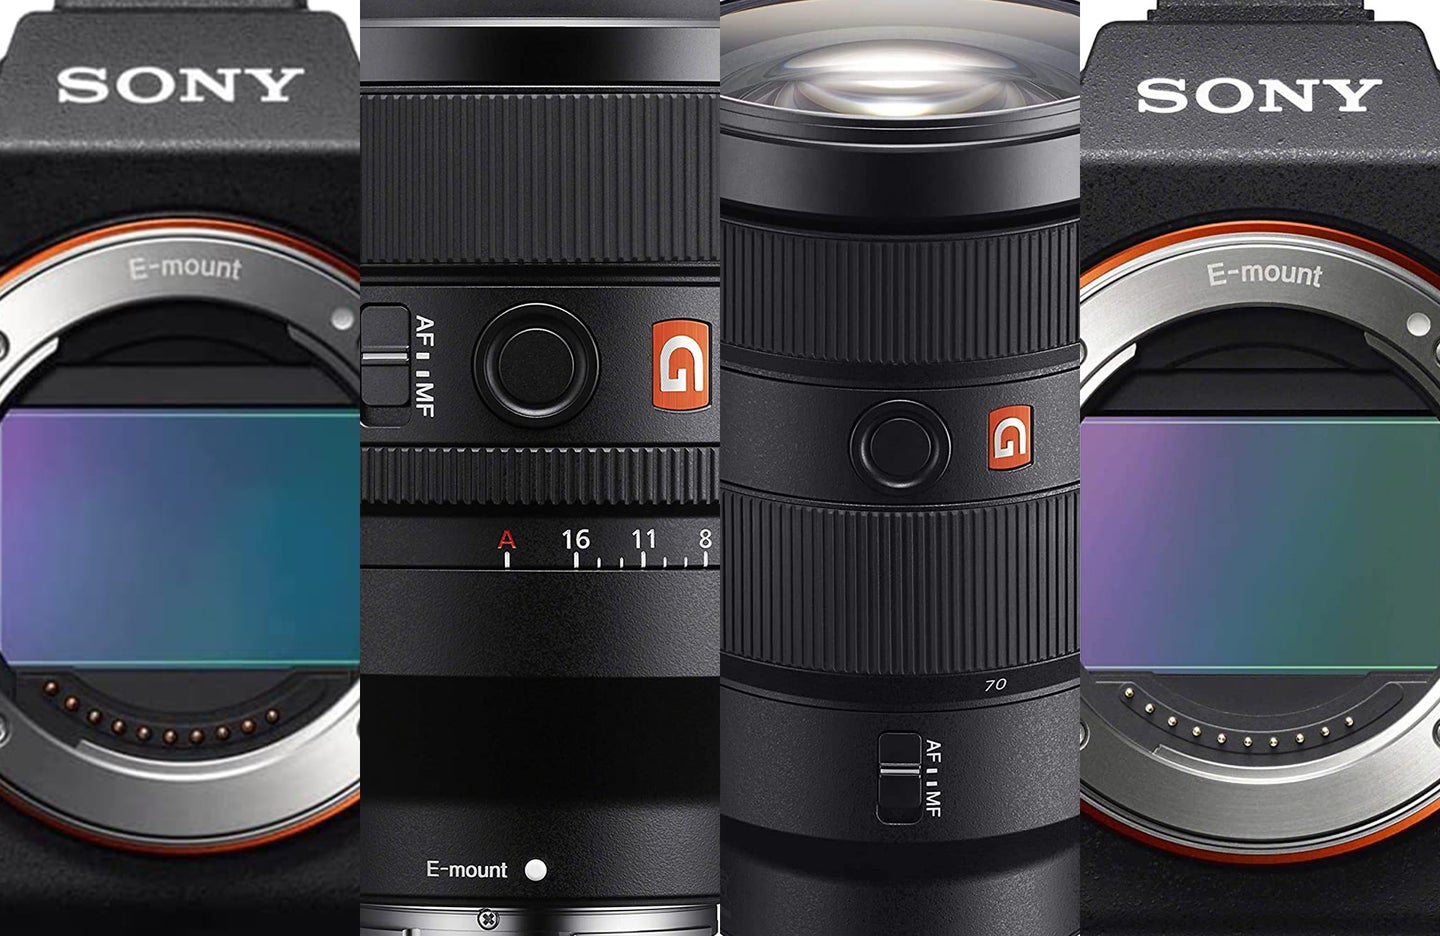 Select Sony cameras and lenses are on sale.